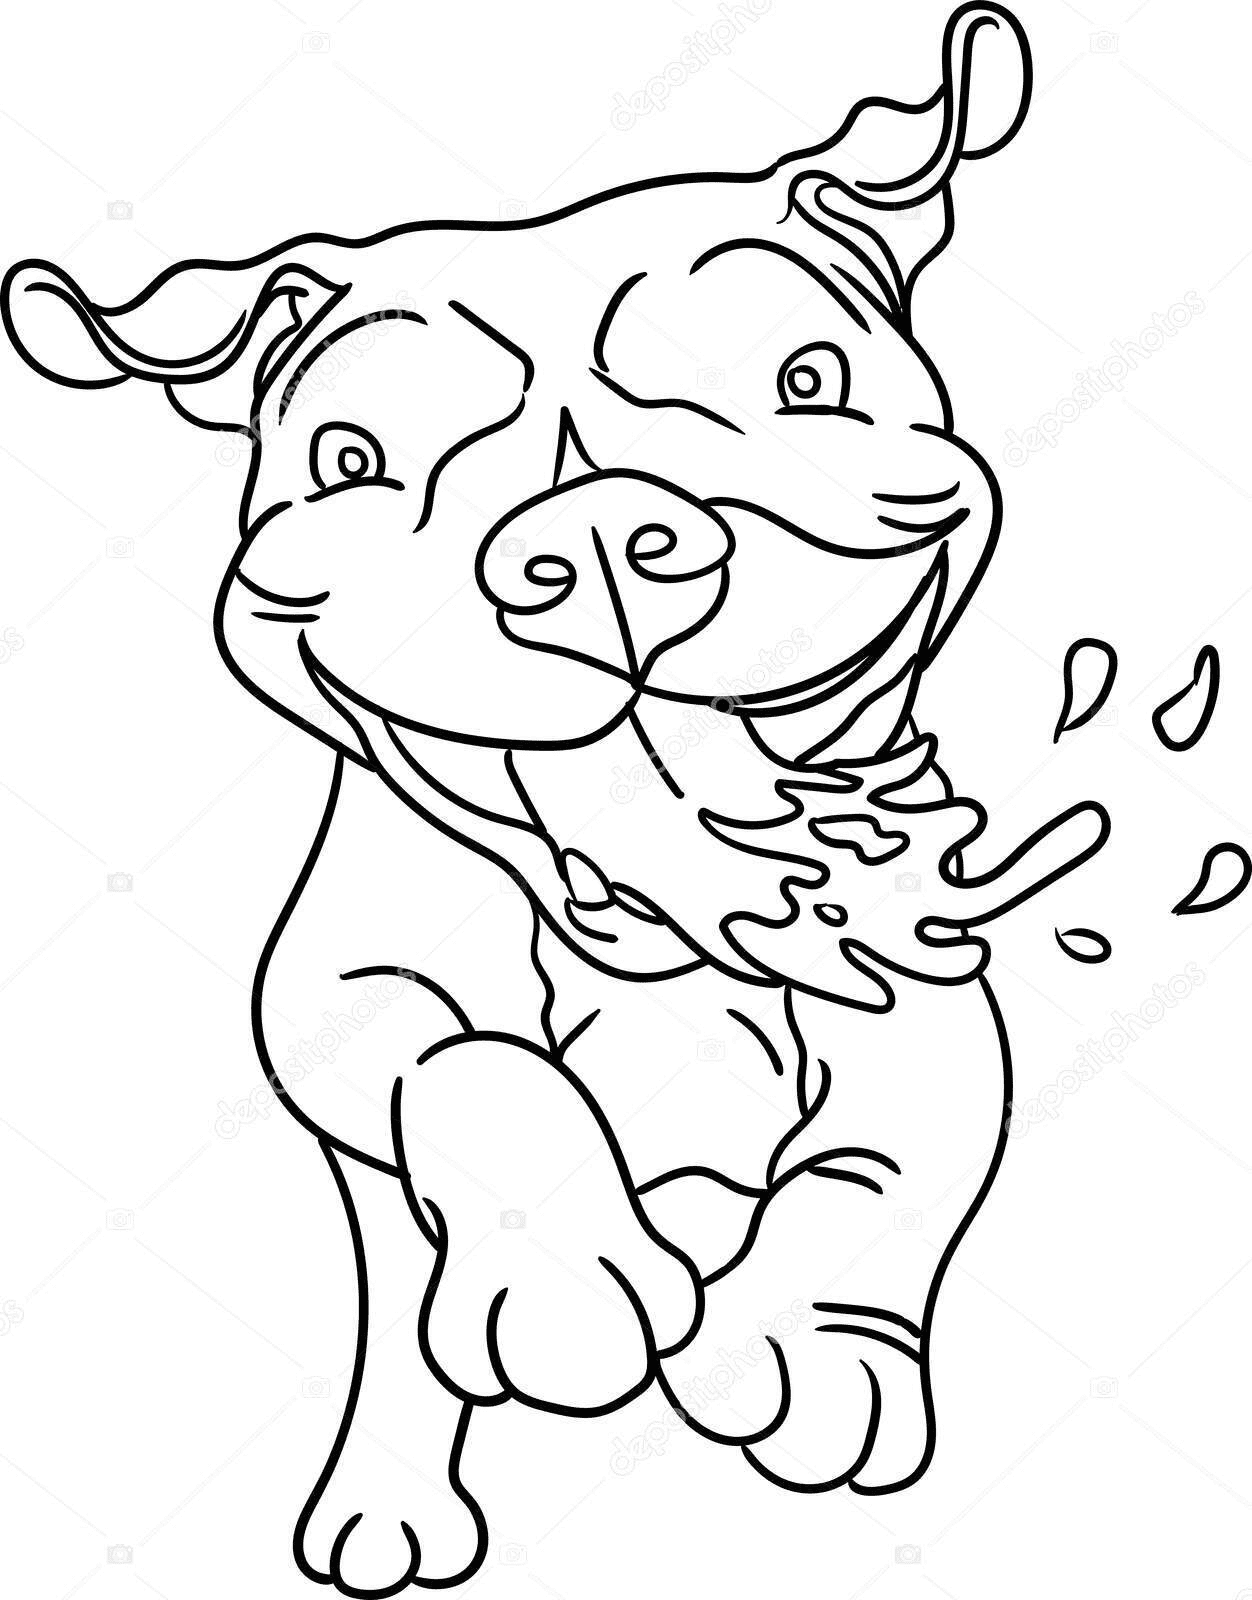 Dog Pitbull Coloring Pages - Pitbull Coloring Pages - Coloring Pages For  Kids And Adults